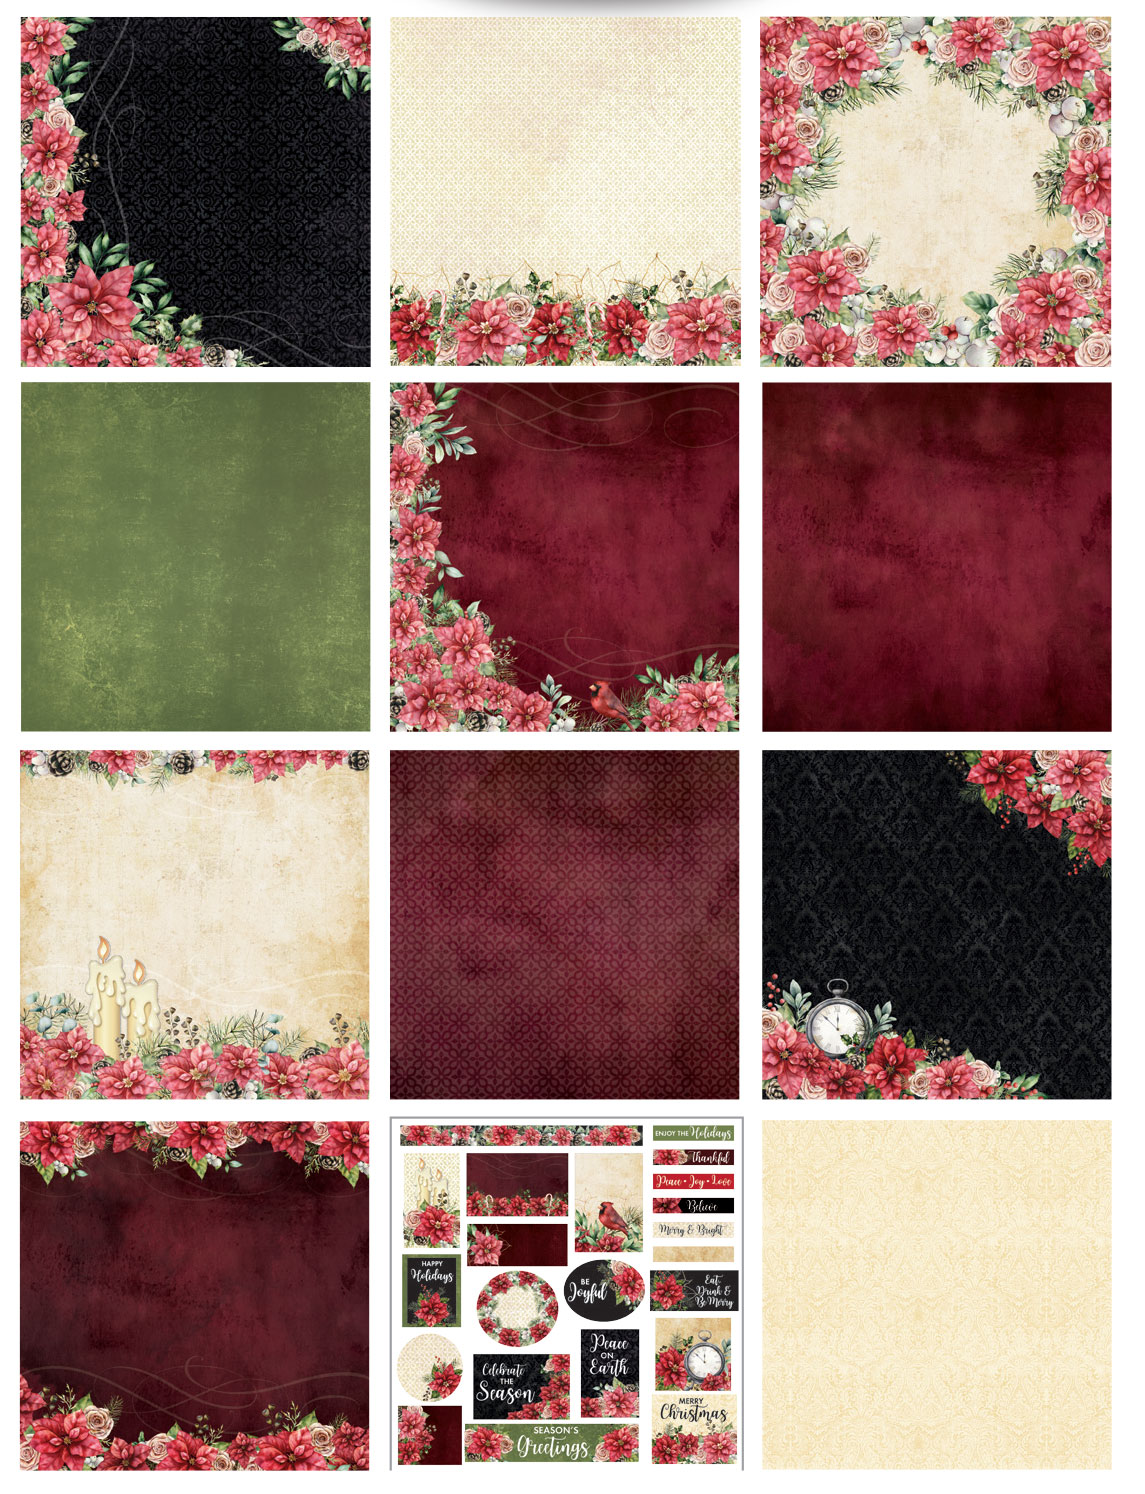 Red and Black Scrapbook Paper